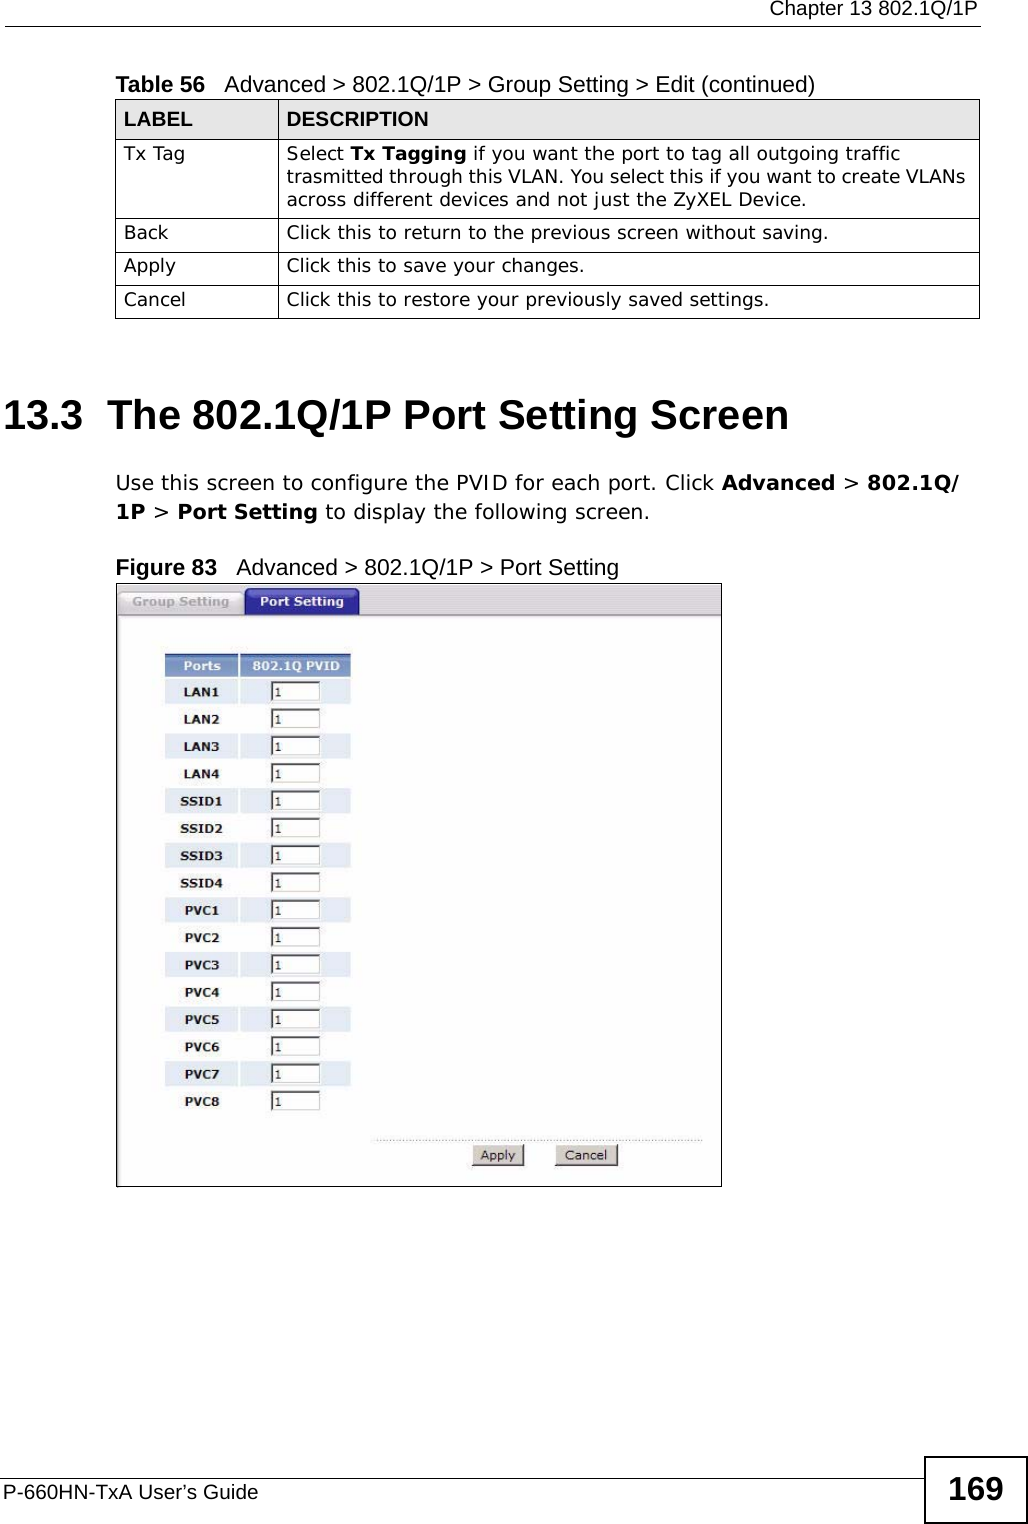  Chapter 13 802.1Q/1PP-660HN-TxA User’s Guide 16913.3  The 802.1Q/1P Port Setting ScreenUse this screen to configure the PVID for each port. Click Advanced &gt; 802.1Q/1P &gt; Port Setting to display the following screen.Figure 83   Advanced &gt; 802.1Q/1P &gt; Port SettingTx Tag Select Tx Tagging if you want the port to tag all outgoing traffic trasmitted through this VLAN. You select this if you want to create VLANs across different devices and not just the ZyXEL Device.Back Click this to return to the previous screen without saving.Apply Click this to save your changes.Cancel Click this to restore your previously saved settings.Table 56   Advanced &gt; 802.1Q/1P &gt; Group Setting &gt; Edit (continued)LABEL DESCRIPTION